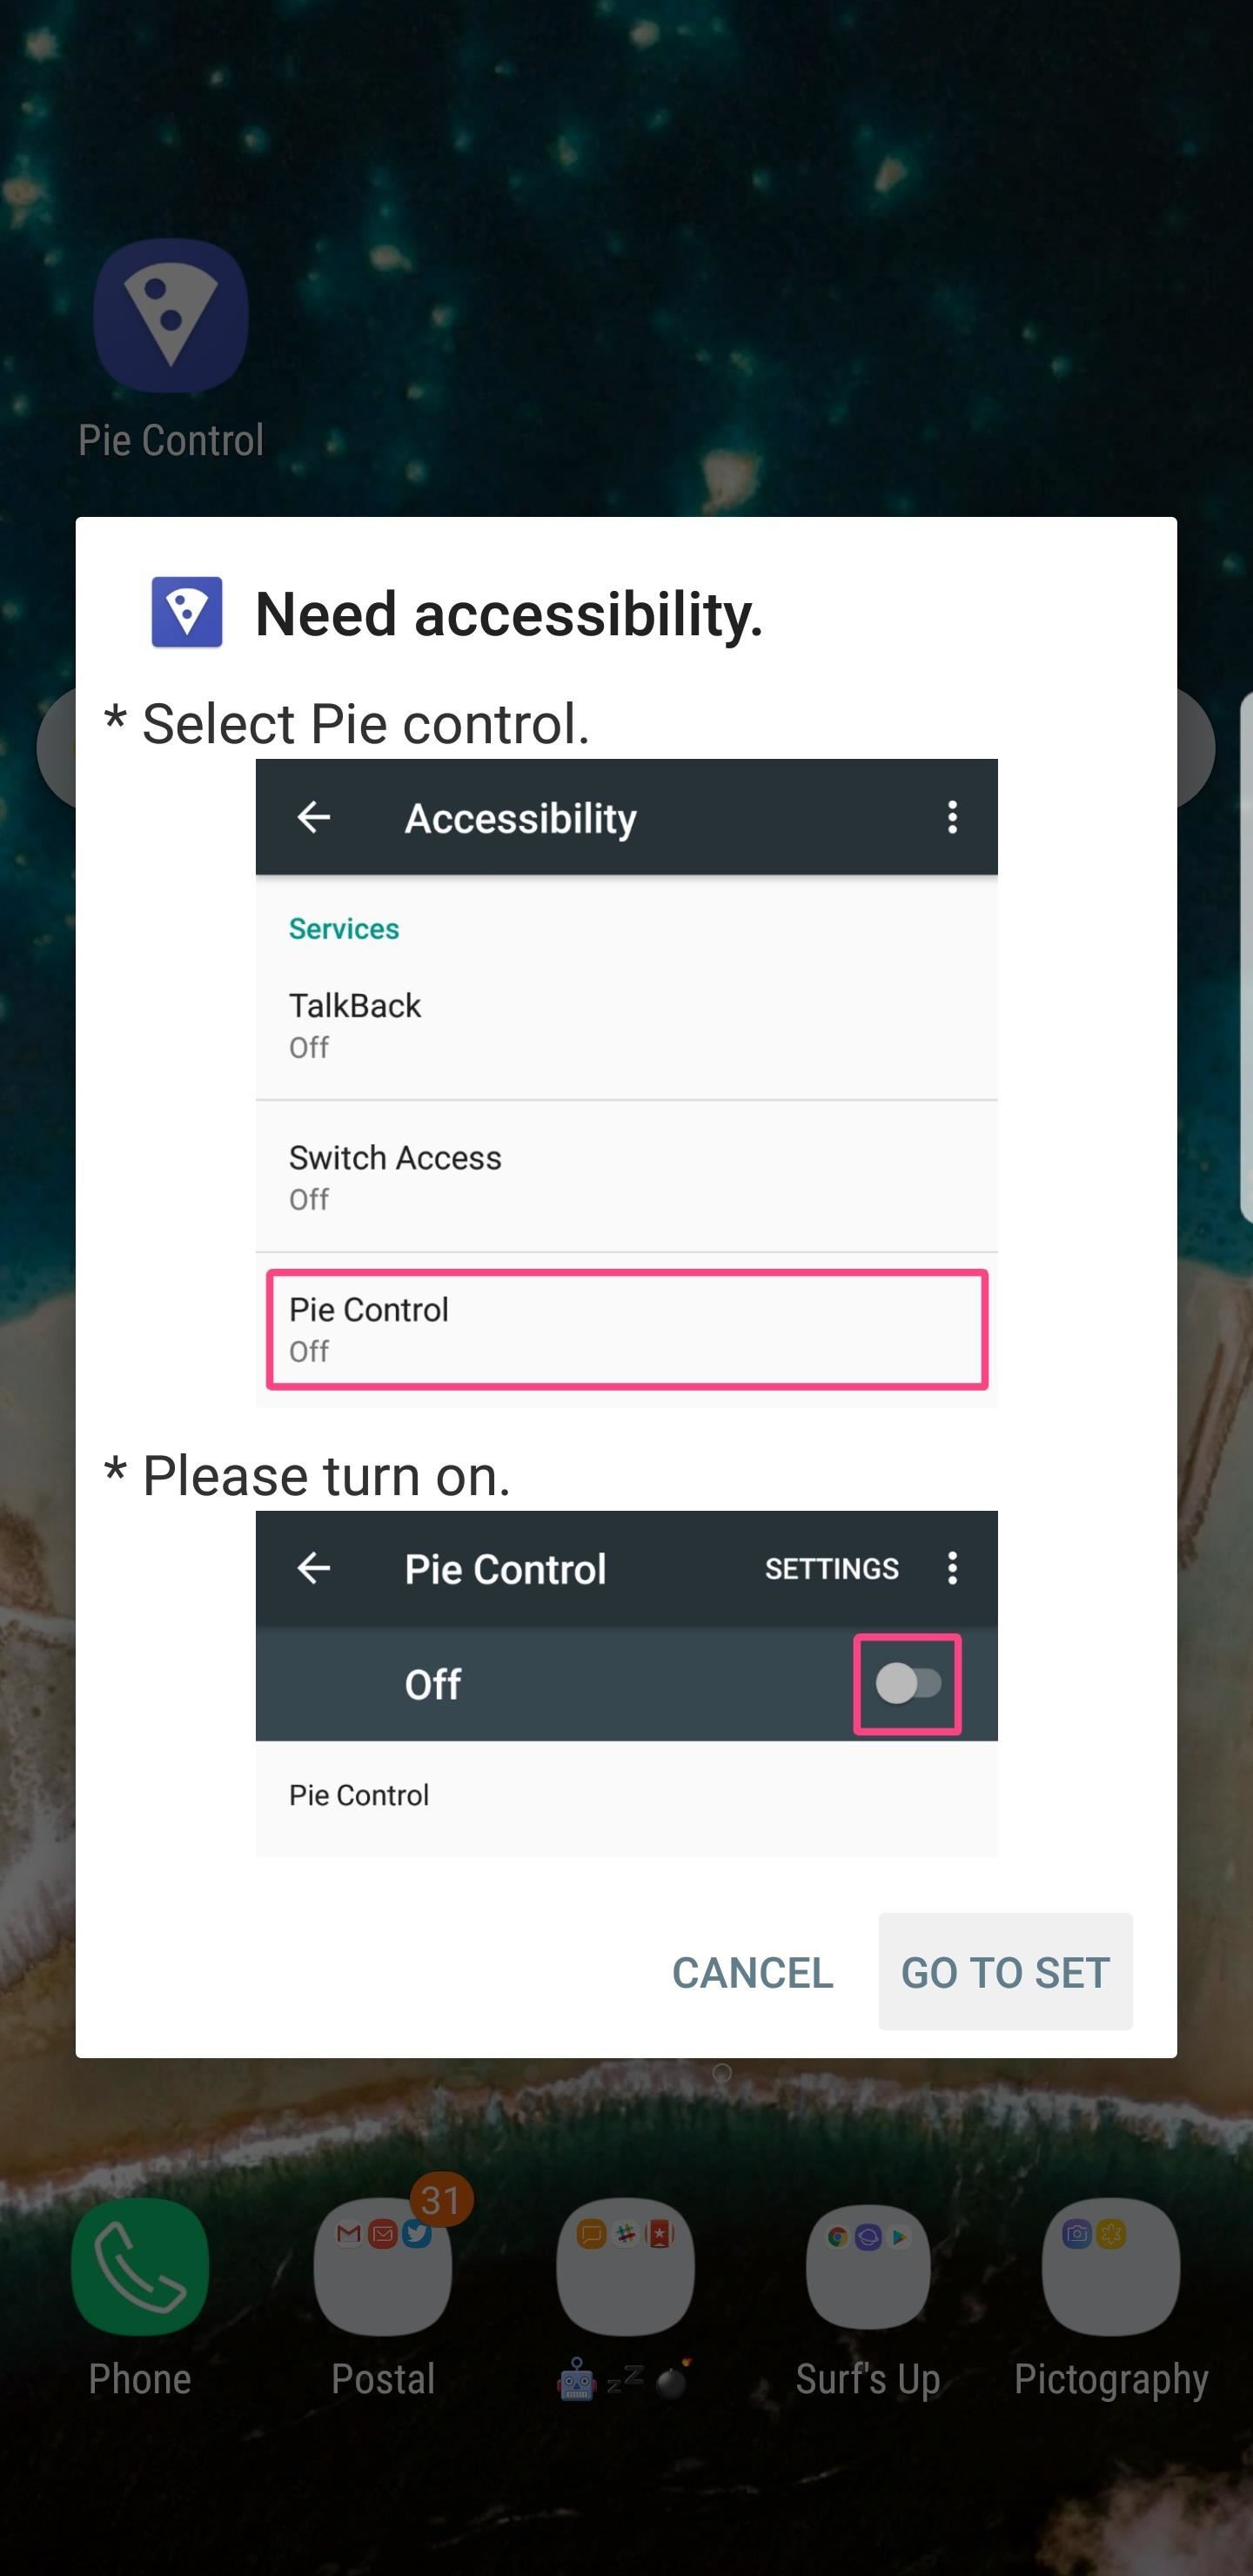 Replace Your Galaxy S8's Nav Bar with Pie Controls to Prevent Screen Burn-In